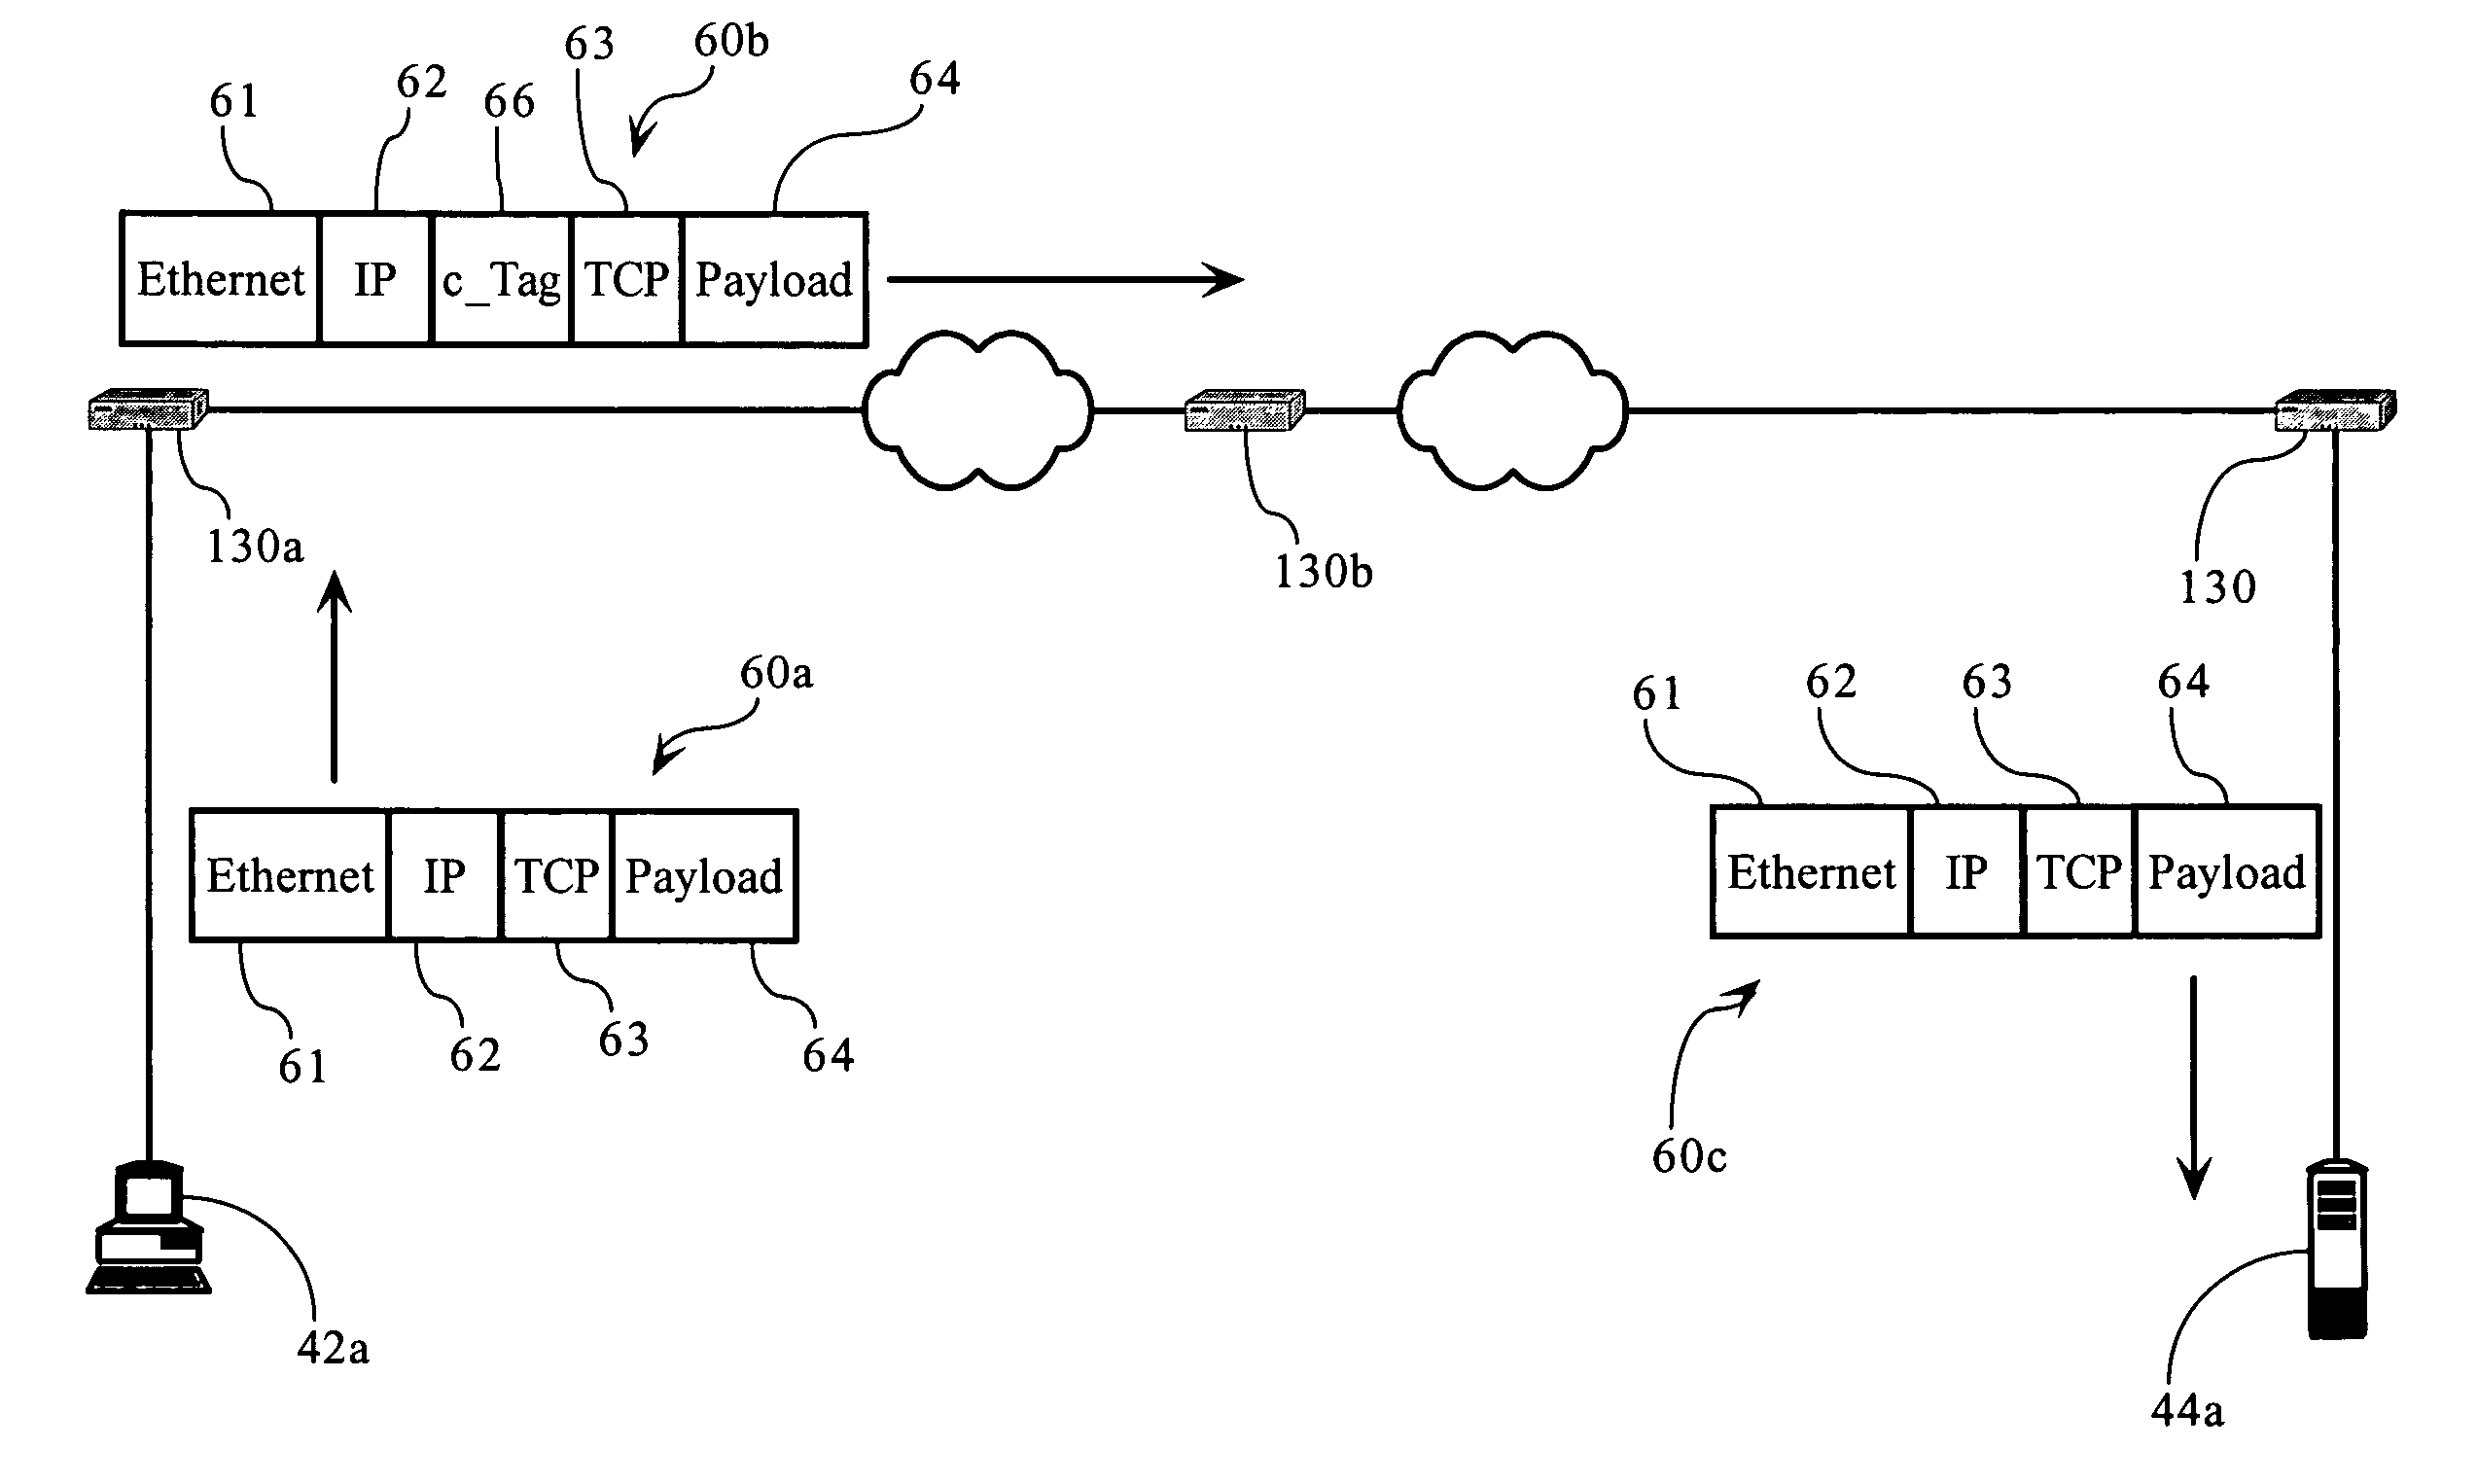 Coordinated environment for classification and control of network traffic